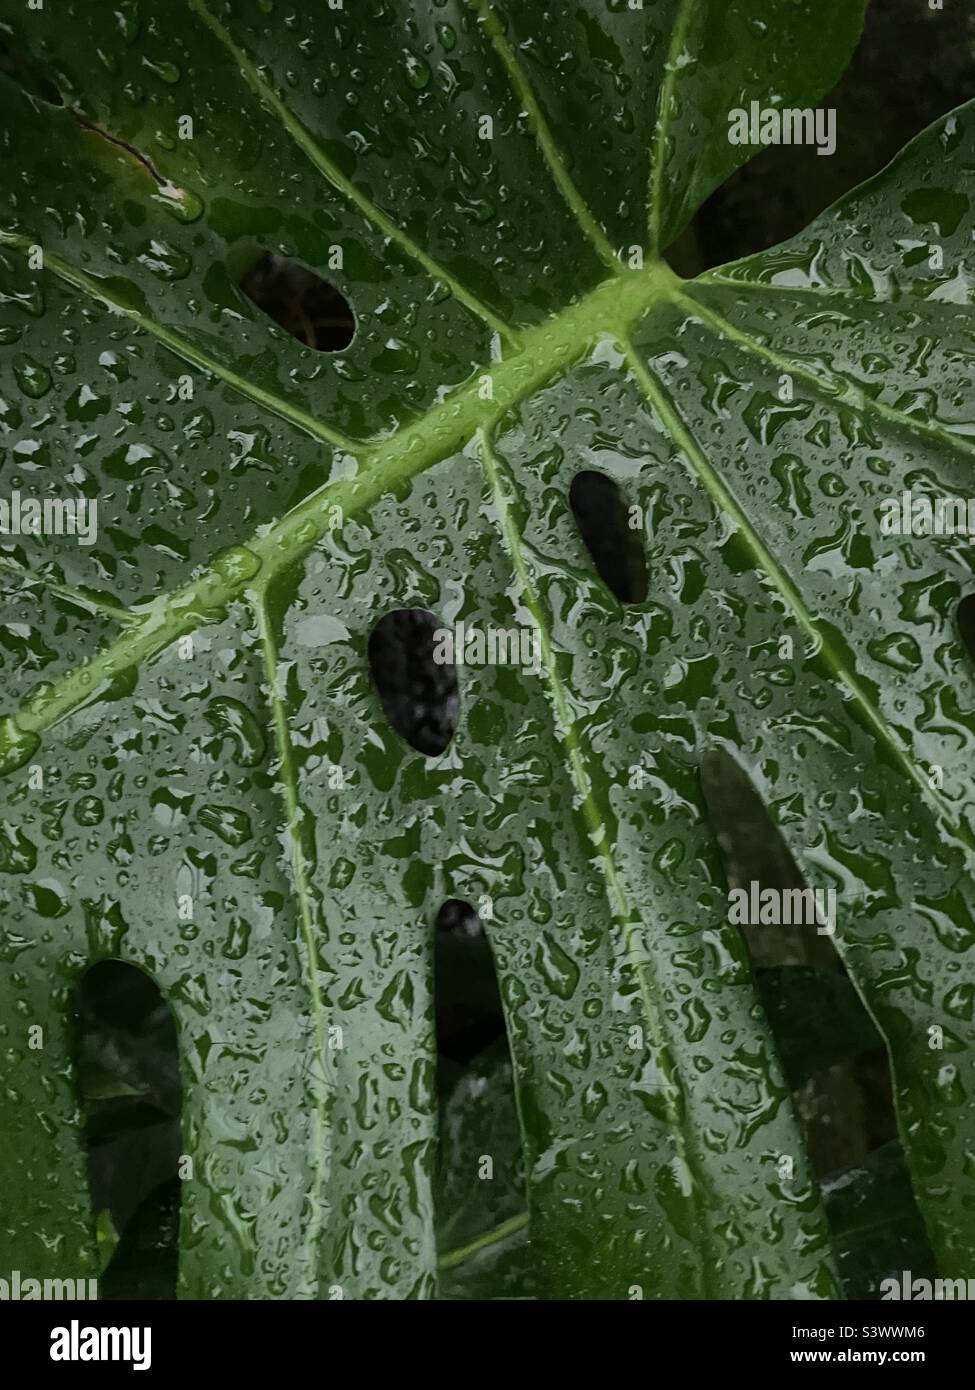 Leaf of Swiss cheese plant covered in water droplets Stock Photo